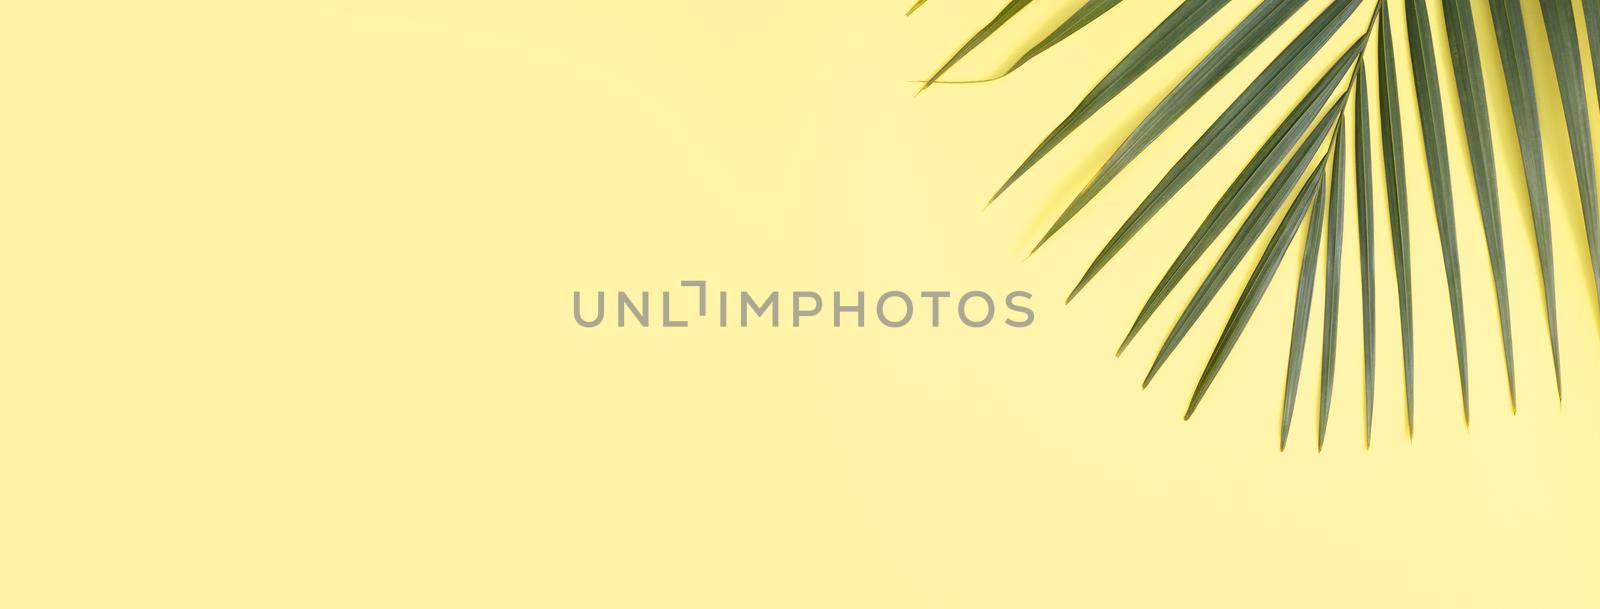 Top view of tropical palm leaves branch isolated on bright yellow background with copy space.